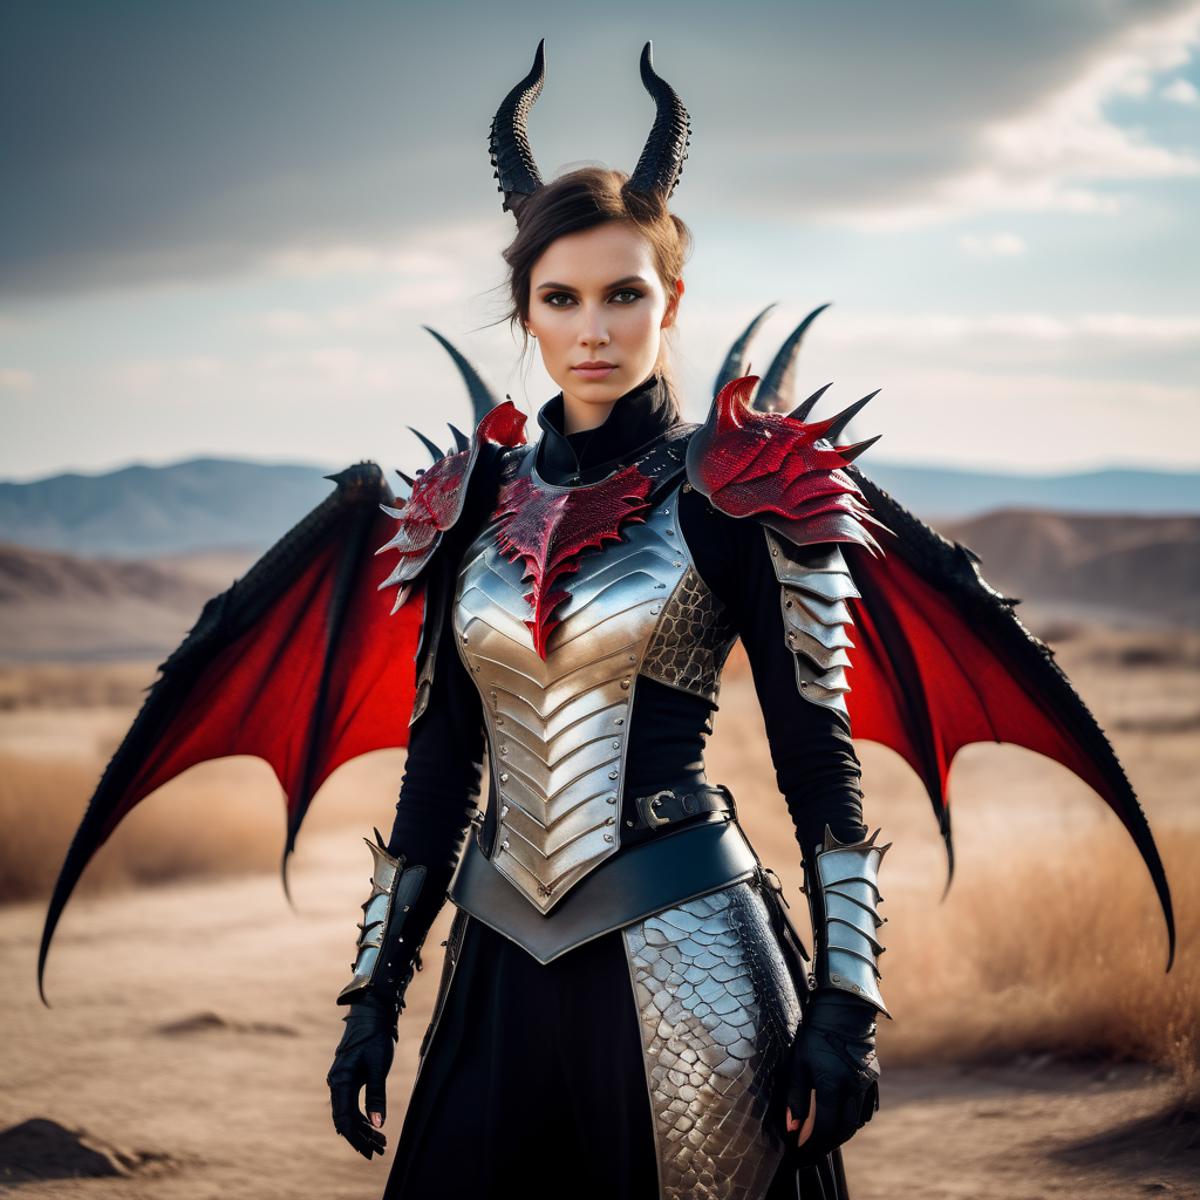 Woman in a metal armor costume with red wings and horns standing in a desert.